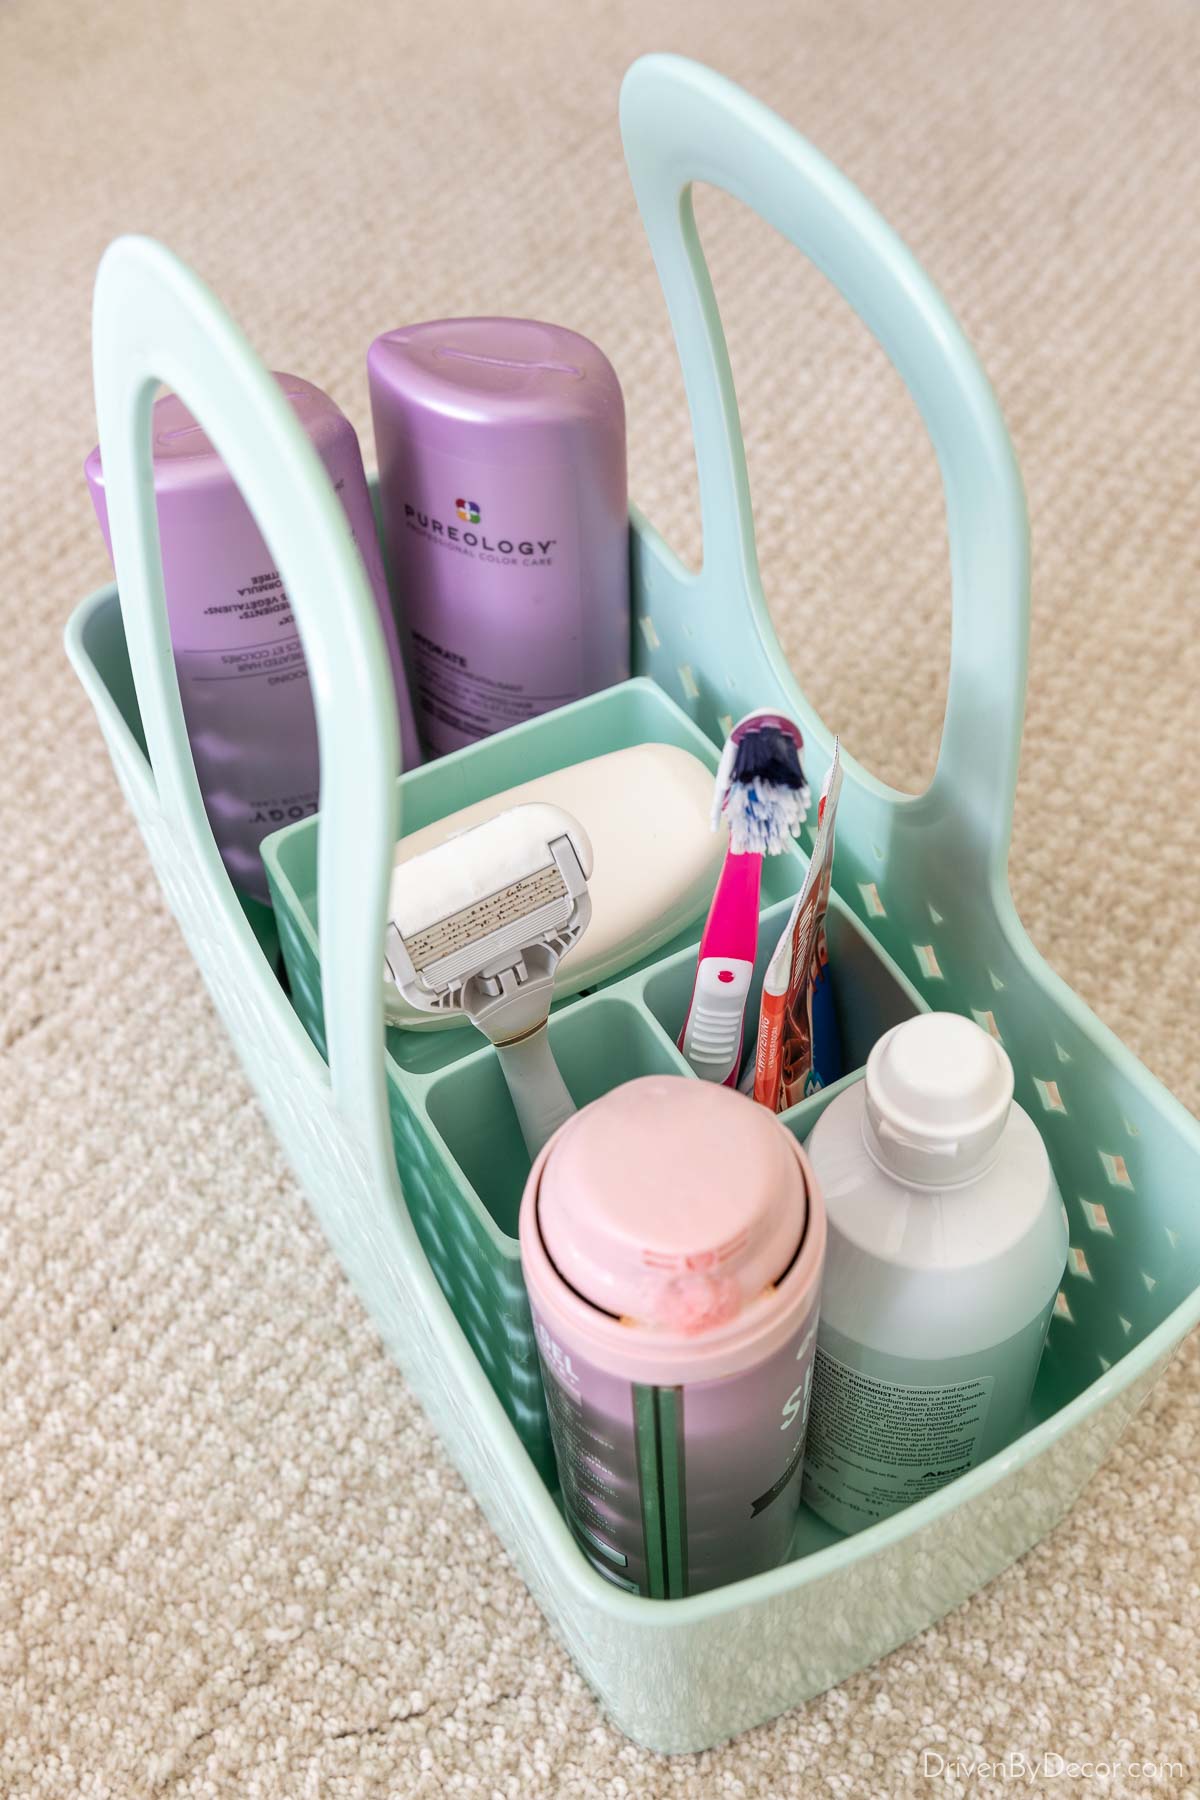 A great shower caddy to add to your college packing list!